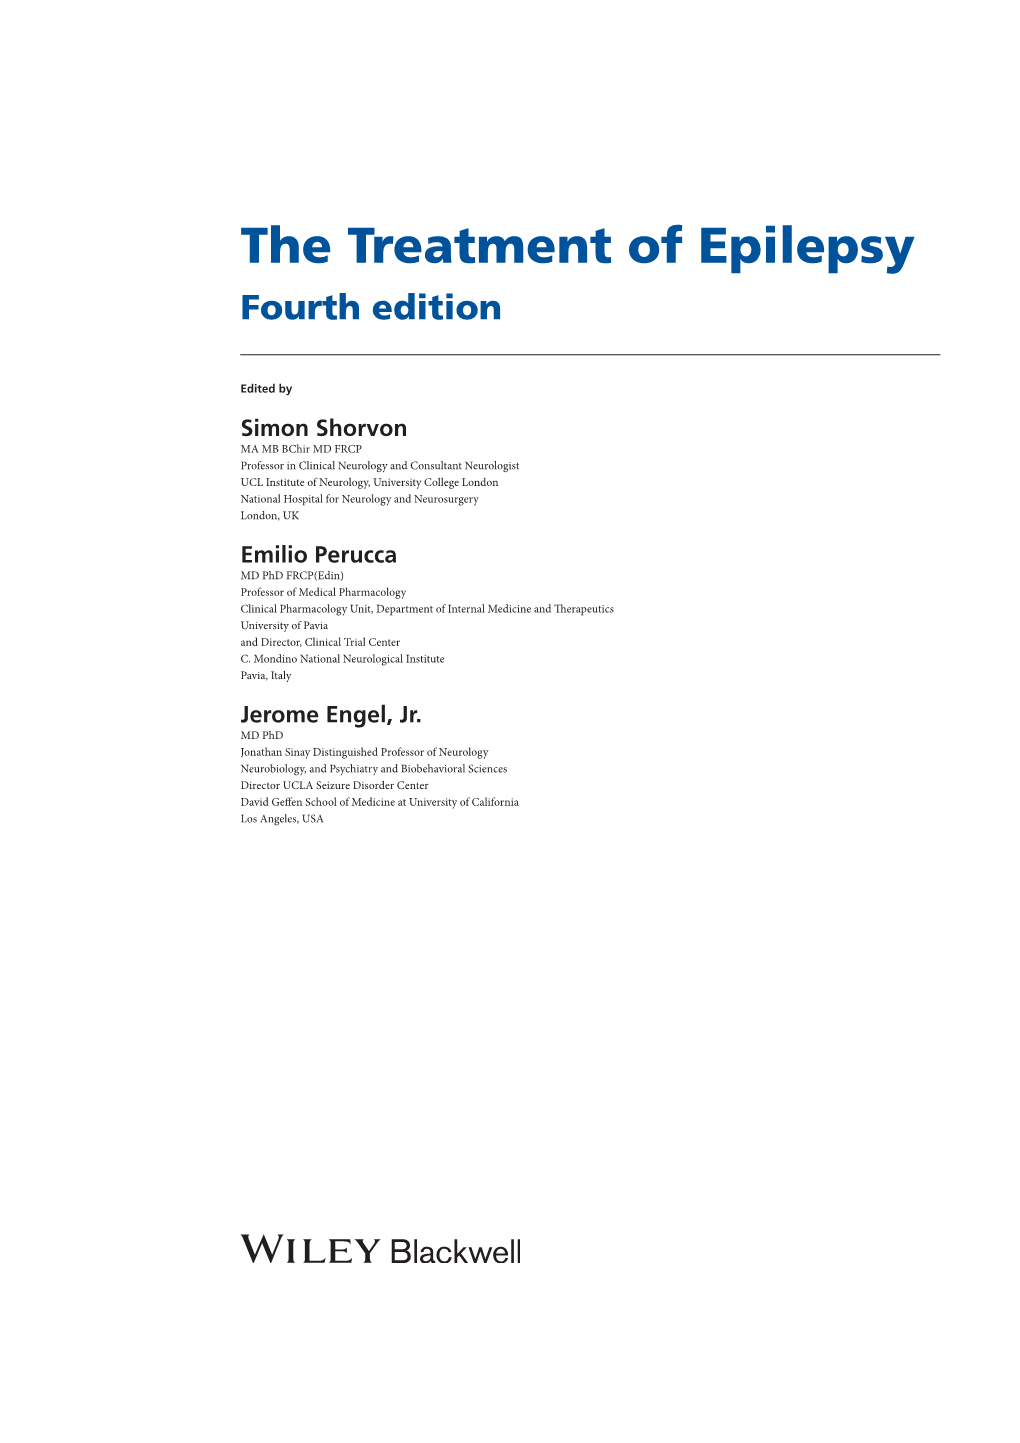 The Treatment of Epilepsy Fourth Edition